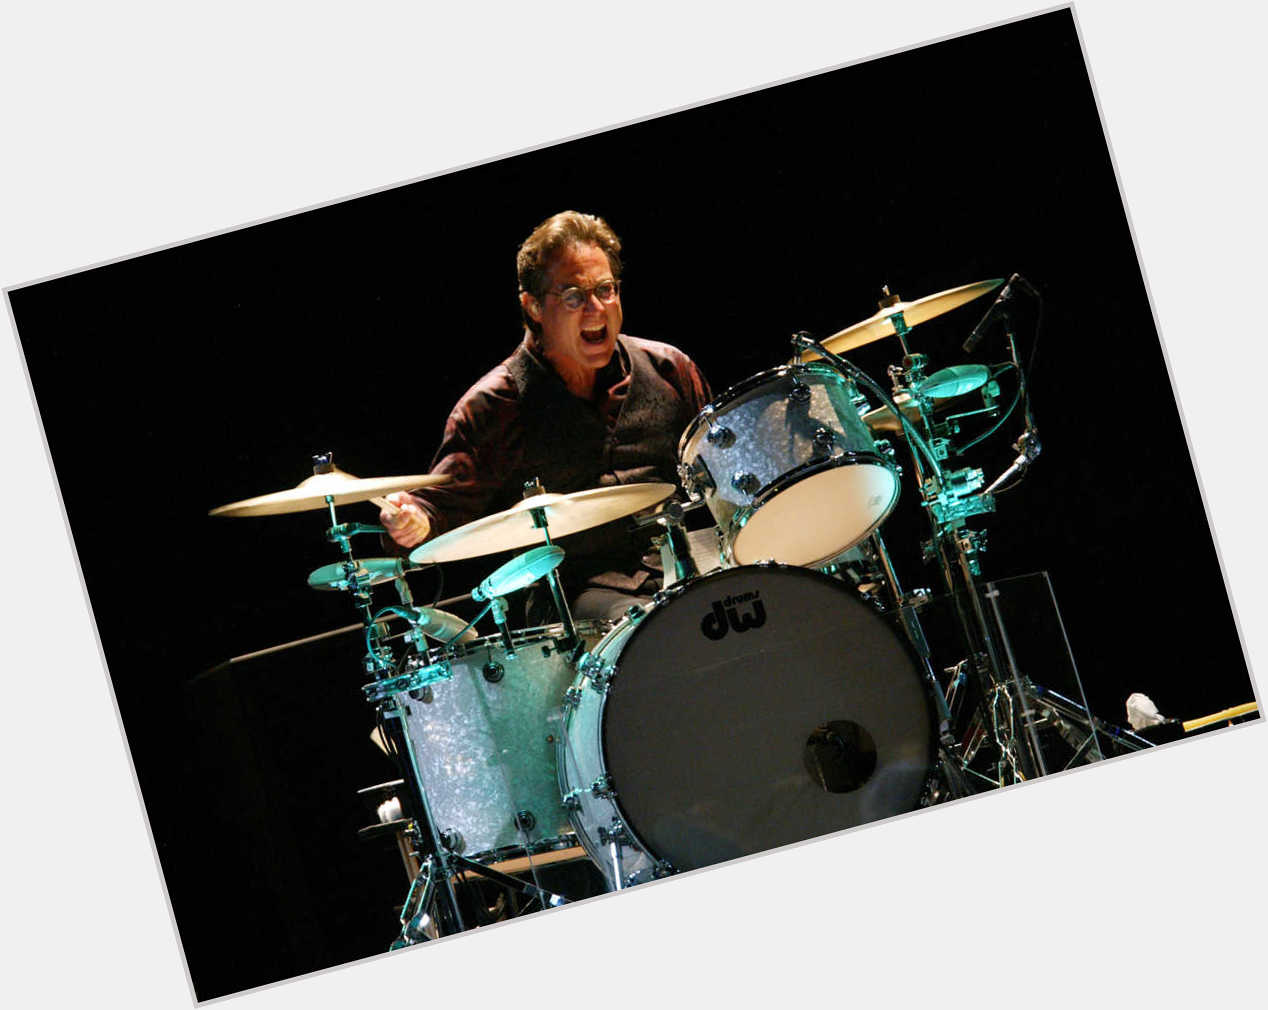 Happy birthday to the Mighty One - Max Weinberg!  